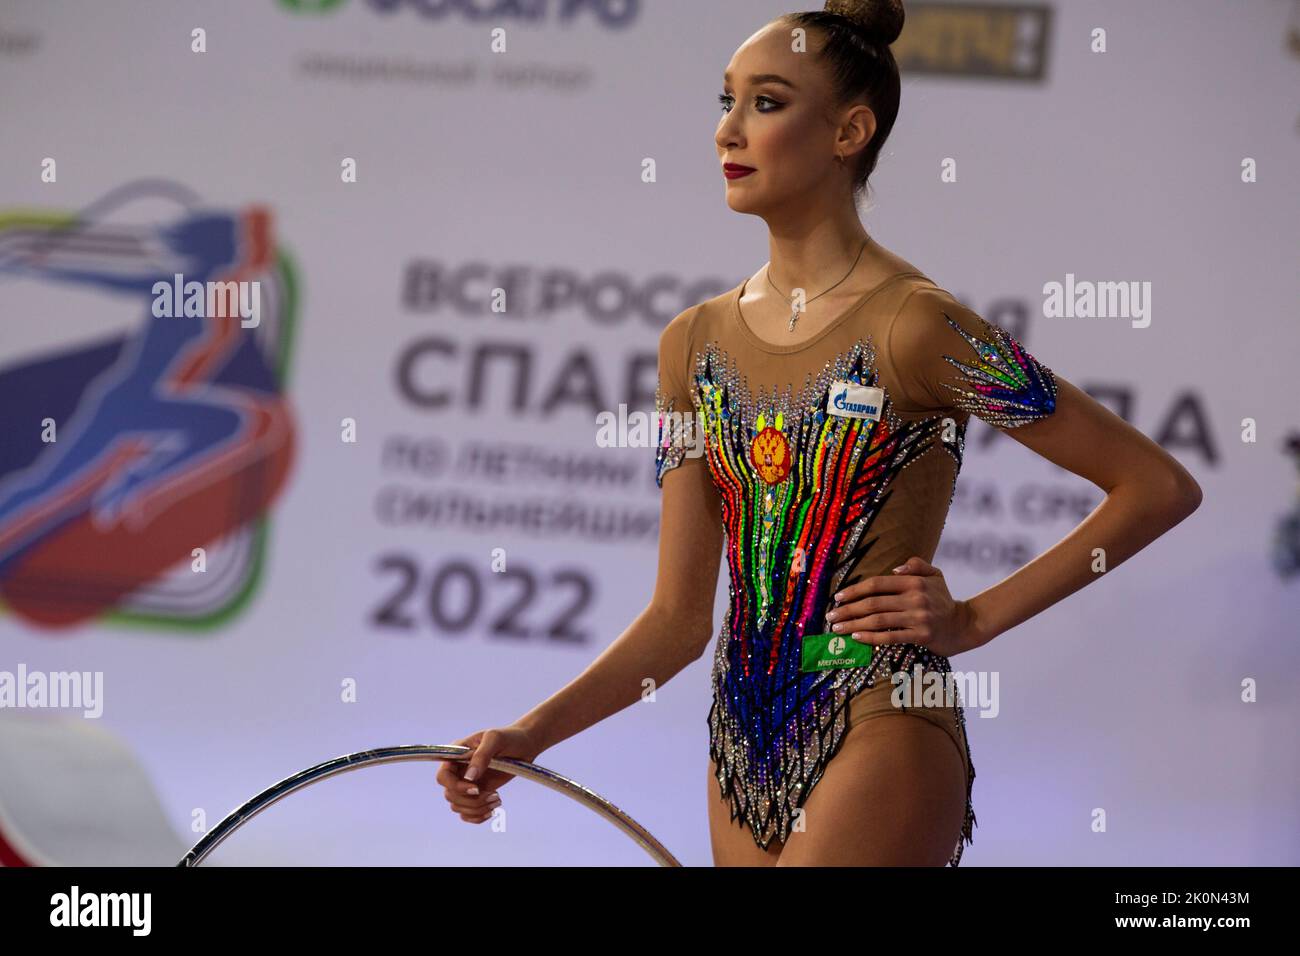 Moscow, Russia. 12th of September, 2022. Alexandra Skubova performs her hoop routine in a qualification at the 2022 All-Russian Summer Spartakiad in Rhythmic Gymnastics at Irina Viner-Usmanova Gymnastics Palace in Luzhniki in Moscow, Russia. Nikolay Vinokurov/Alamy Live News Stock Photo